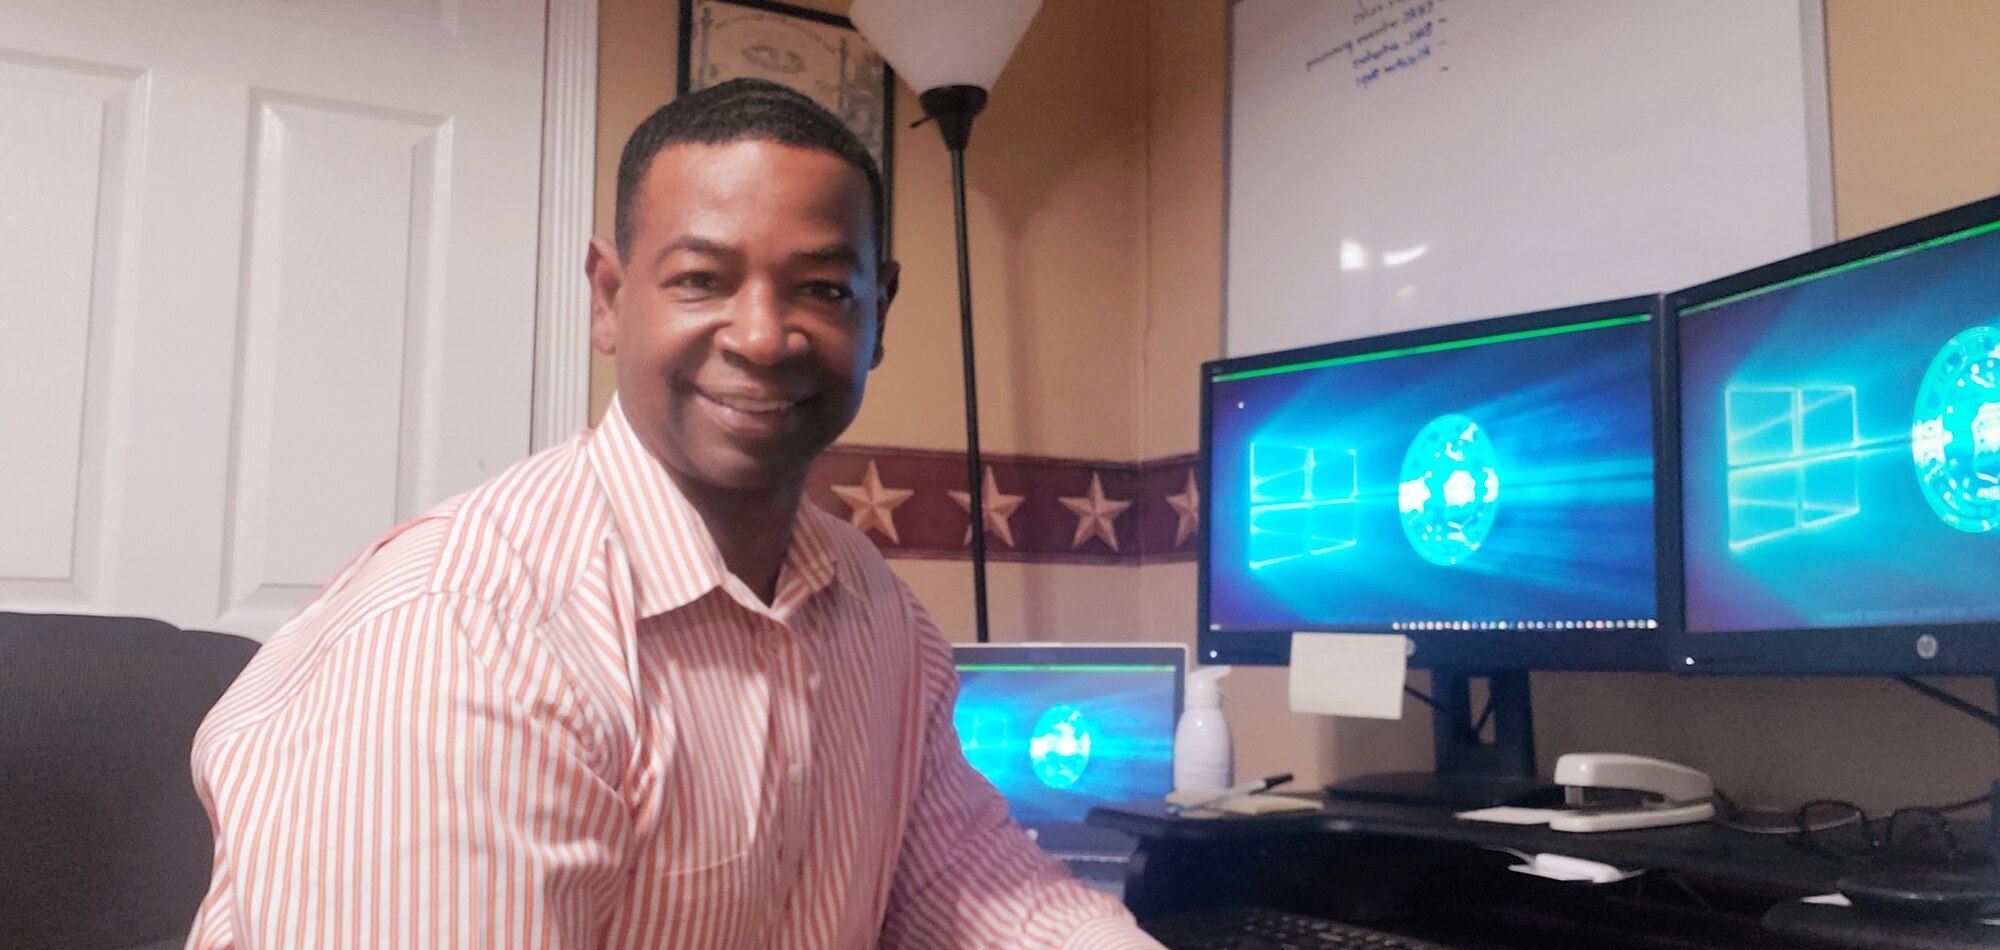 Winston Ferguson, section chief of systems and integration at the Air Force Security Assistance Center on Wright-Patterson Air Force Base, is working with Dayton Regional STEM School to bring more Black history to its students. Contributed photo